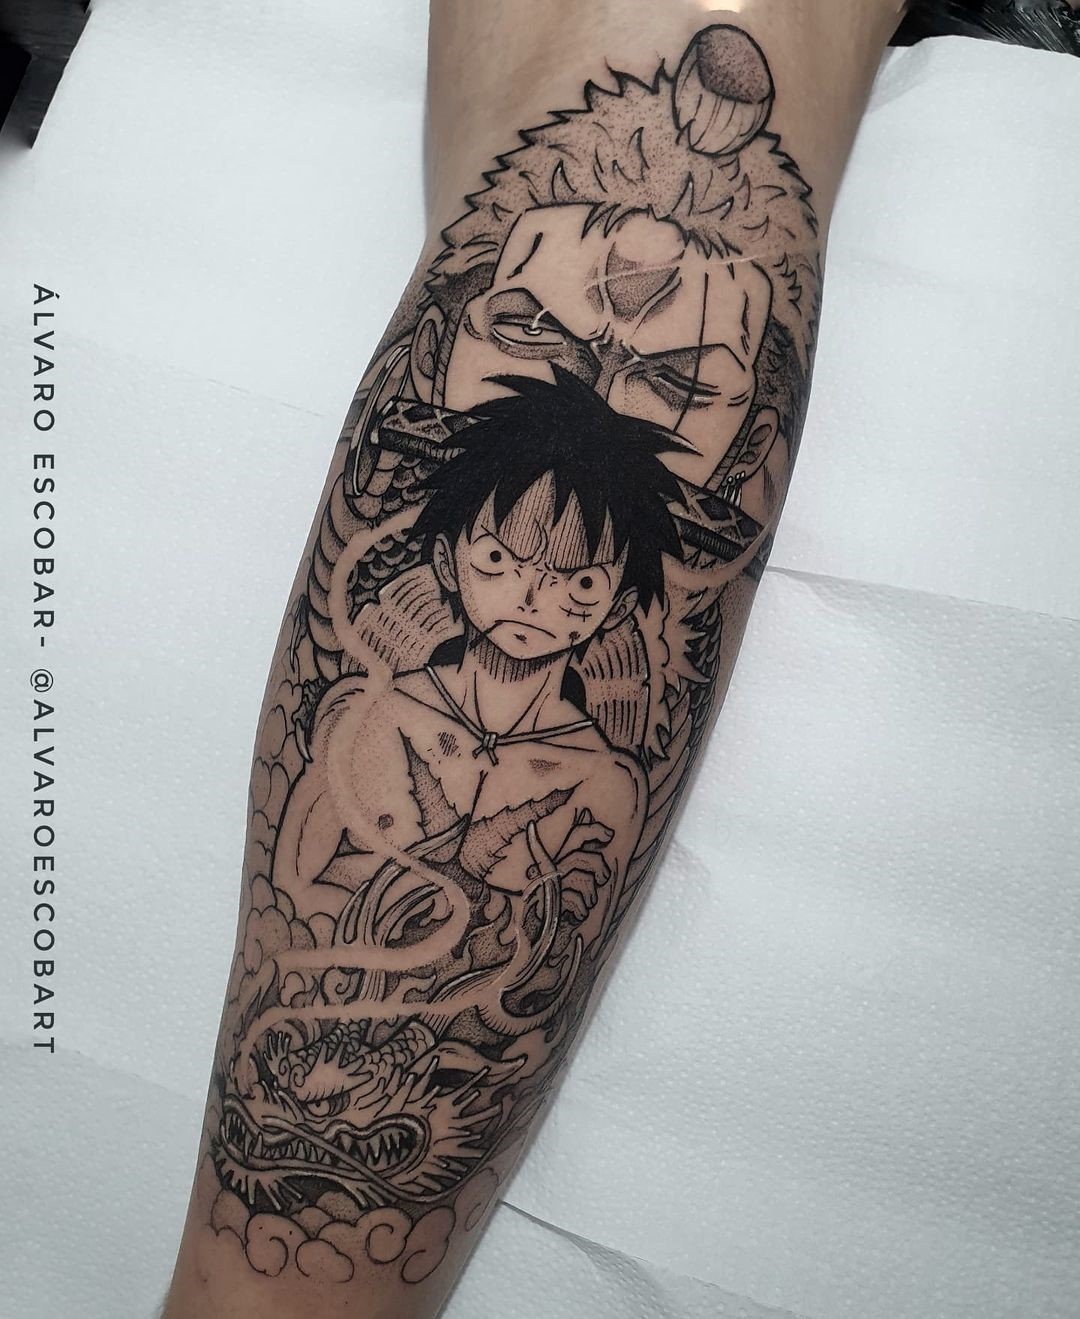 Black & White Ink Ace One Piece Tattoo 